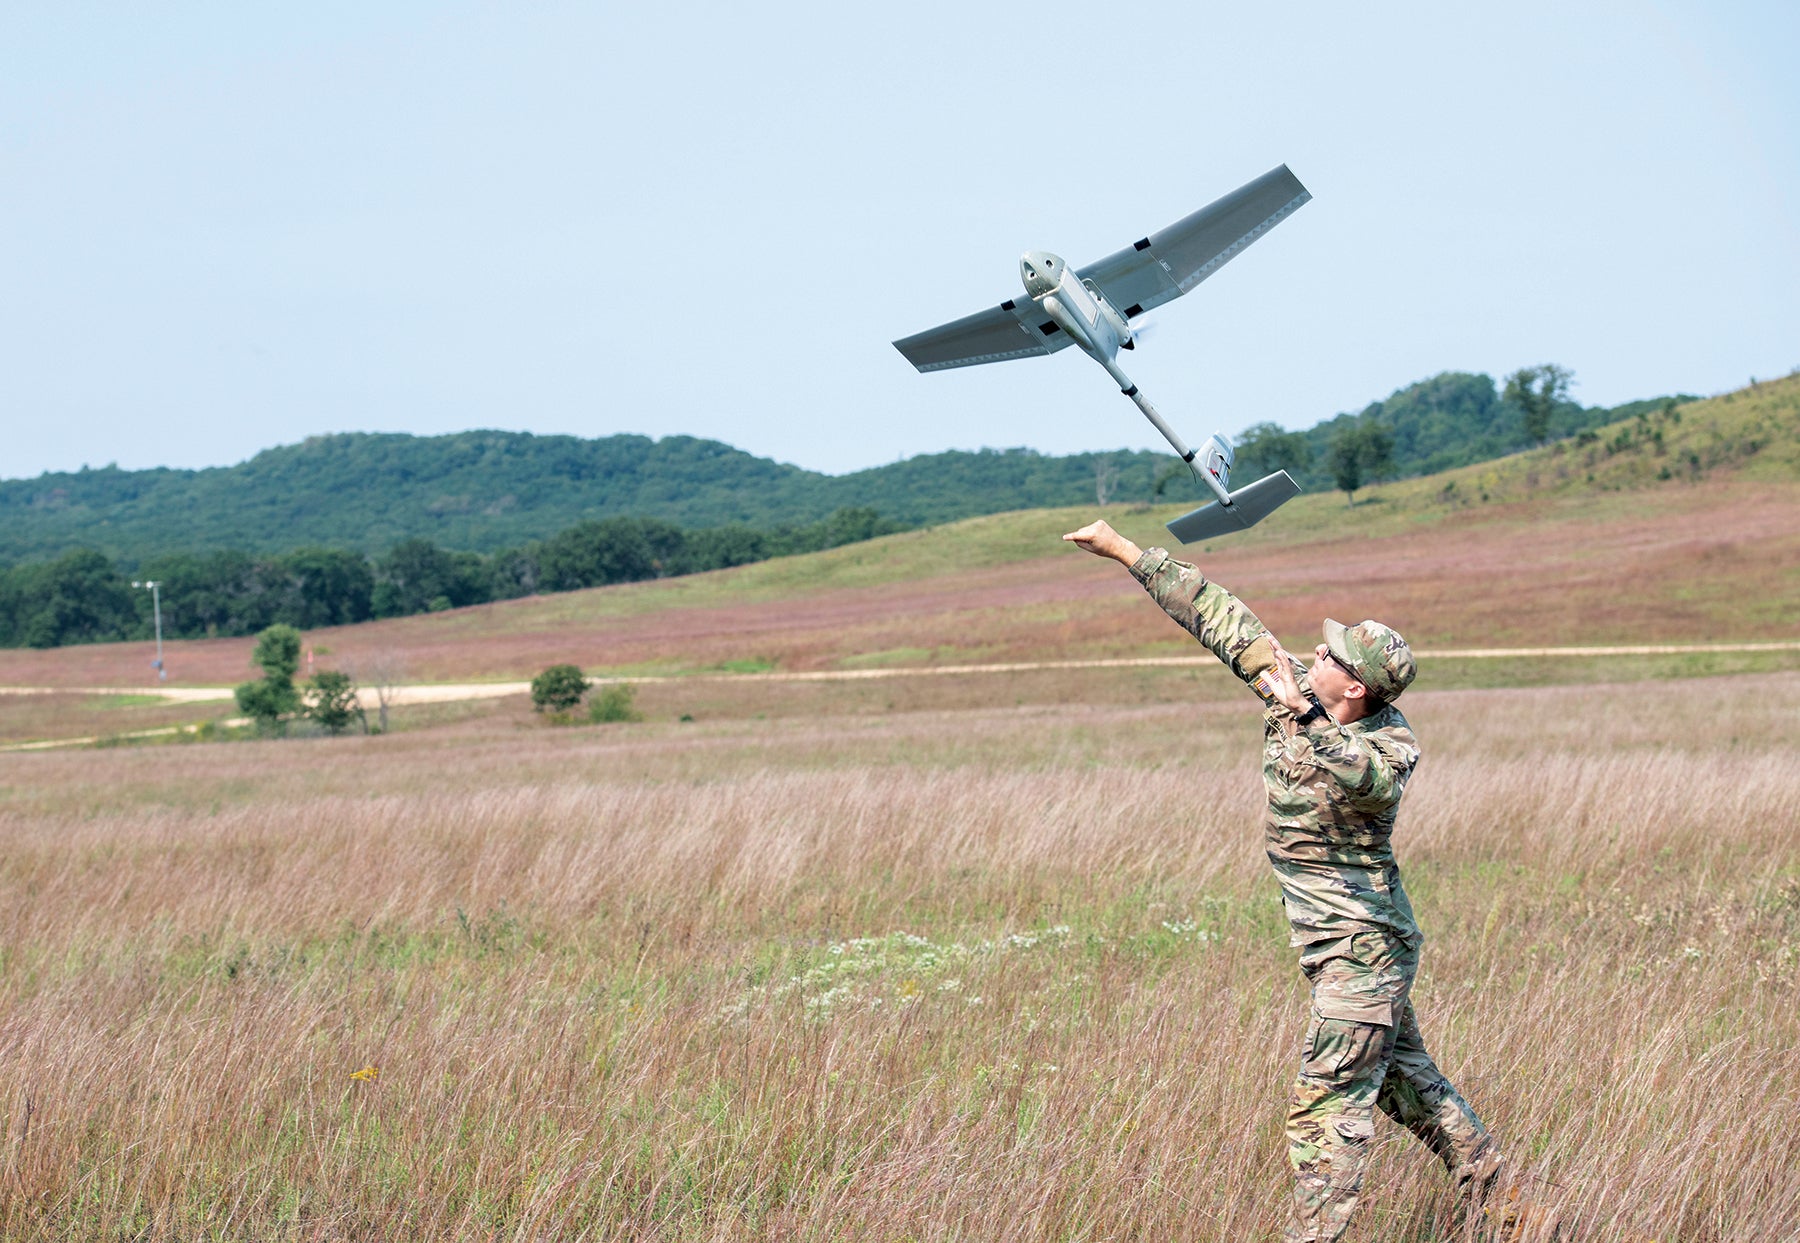 A Wisconsin National Guard soldier launches an RQ-11B Raven small unmanned aircraft system at Fort McCoy, Wisconsin. (U.S. Army/Kevin Clark)